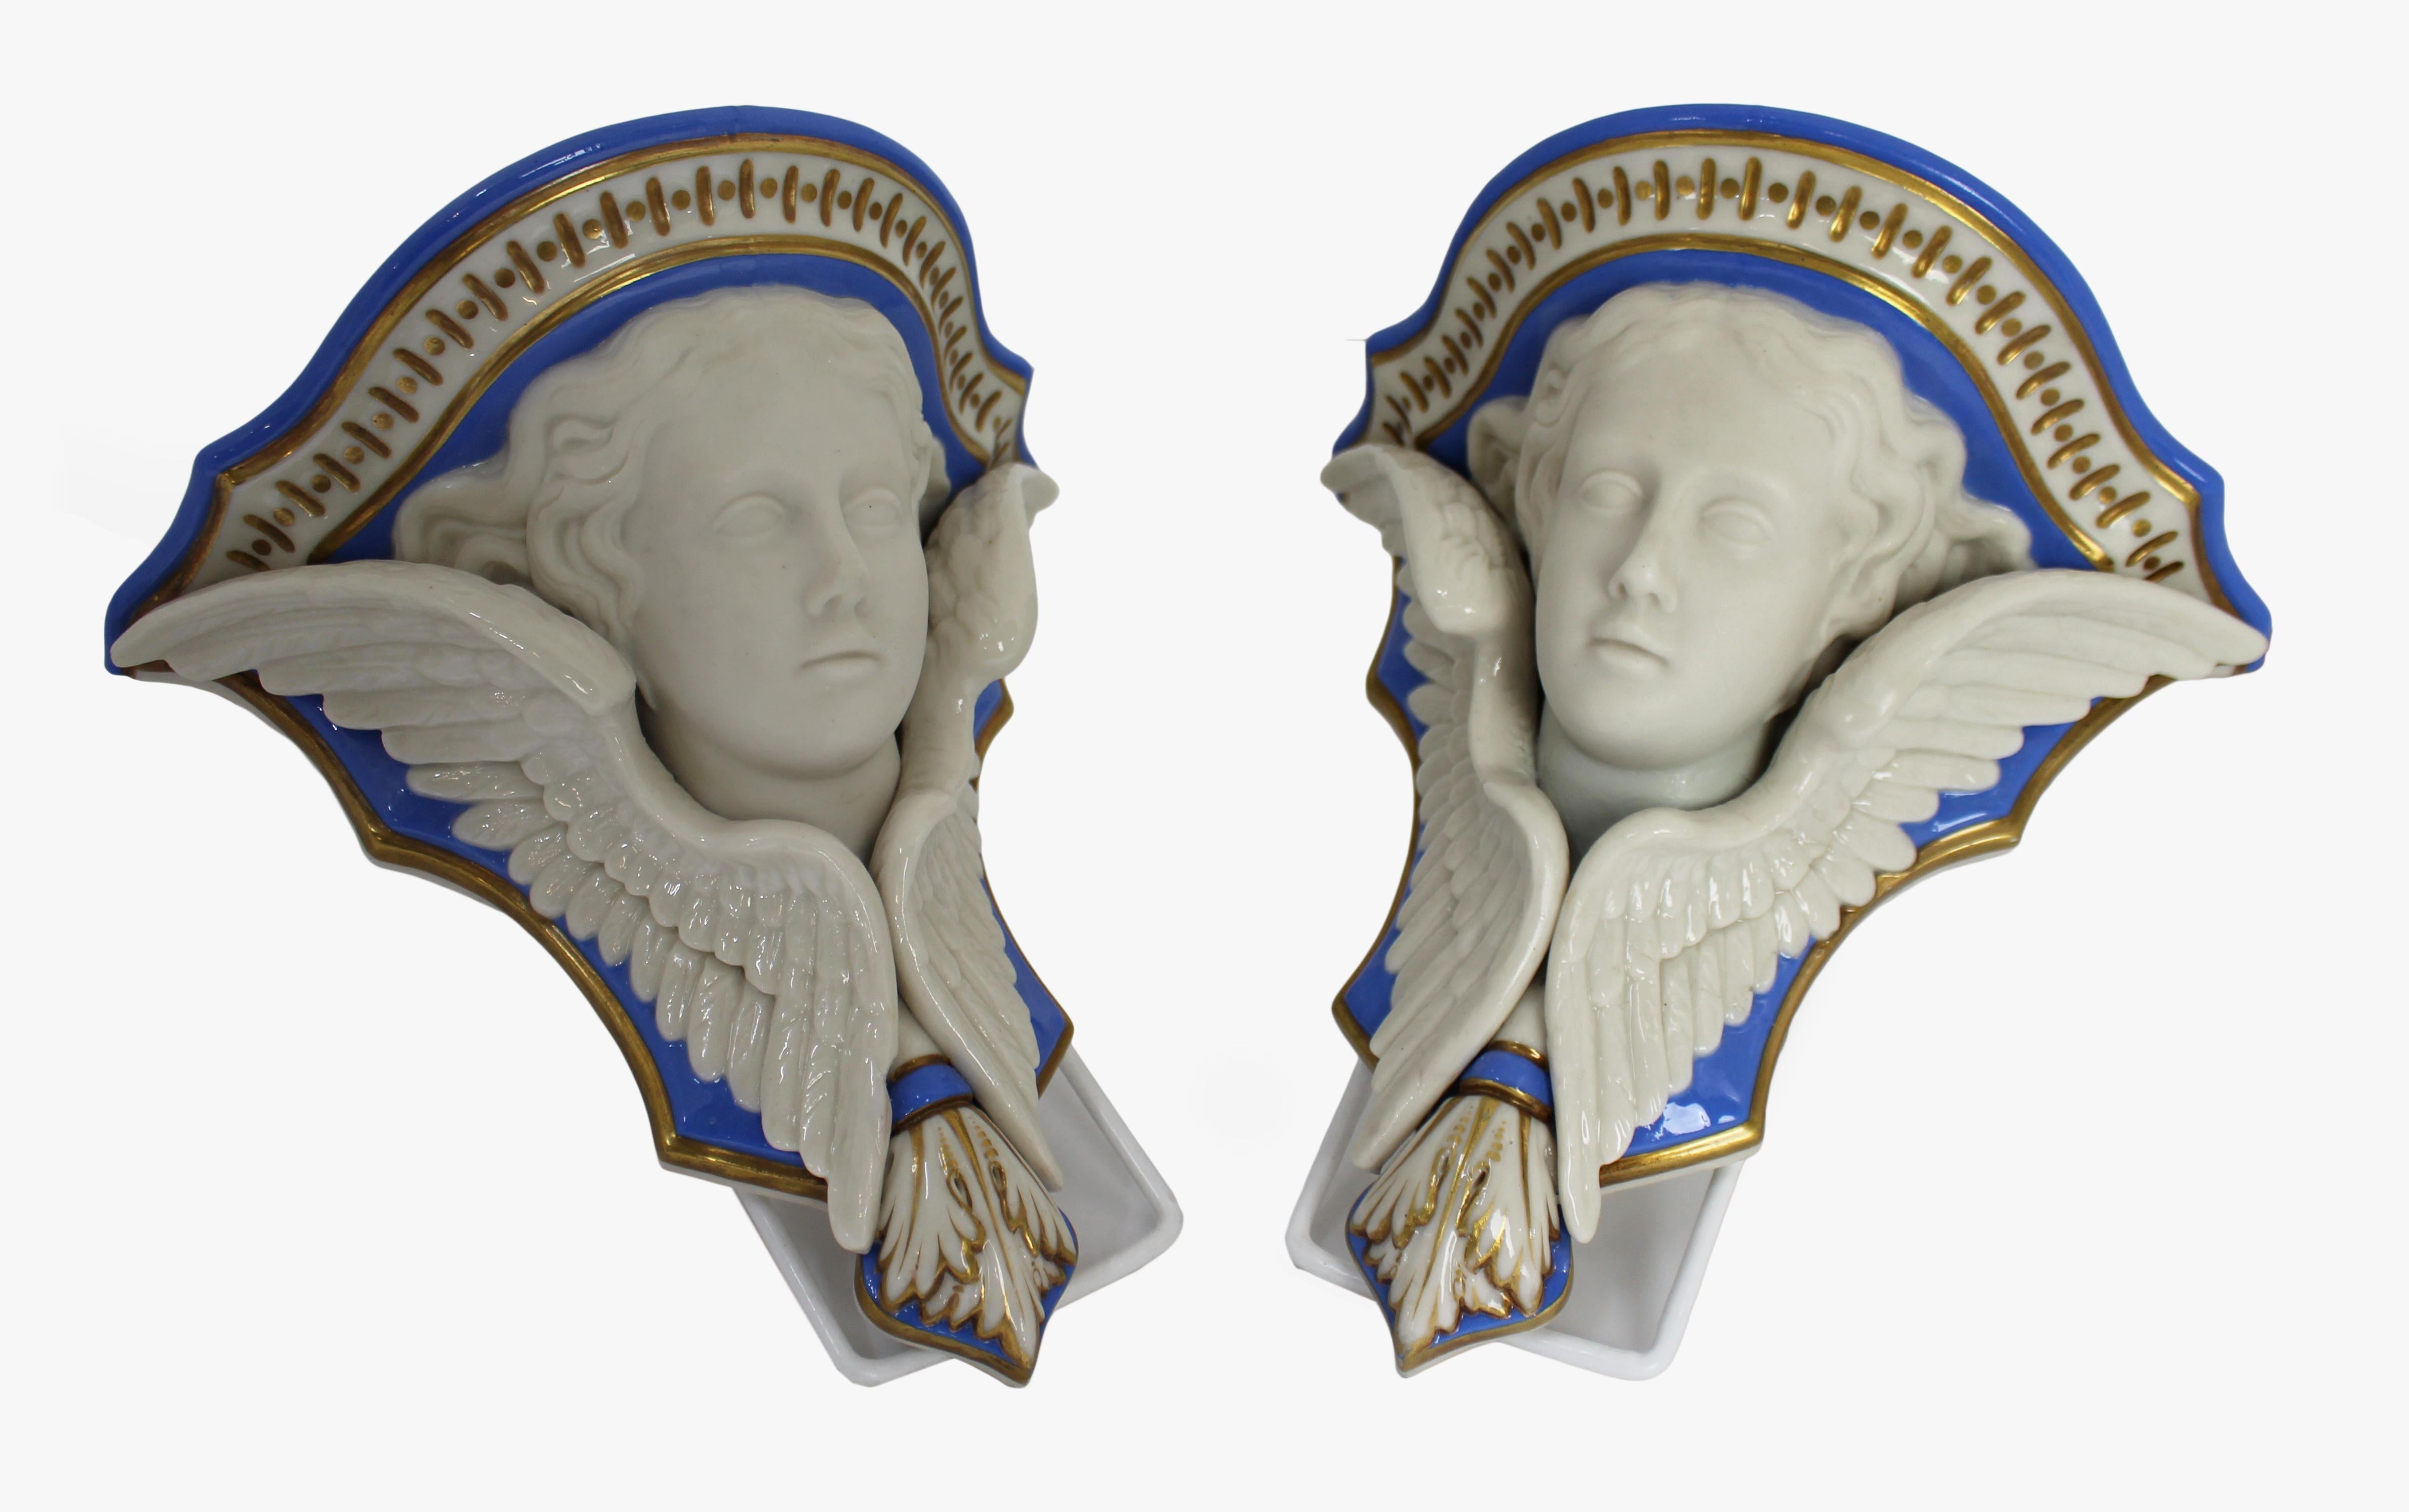 Pair of 19th c. Grainger & Co Porcelain putti wall brackets


Measures: Width 21 cm 8 1/4 in

Depth 12.5 cm 5 in

Height 20.5 cm 8 in
 

Period Late 19th c., English

Manufacturer Grainger & Co, Worcester

Backstamp Factory backstamp